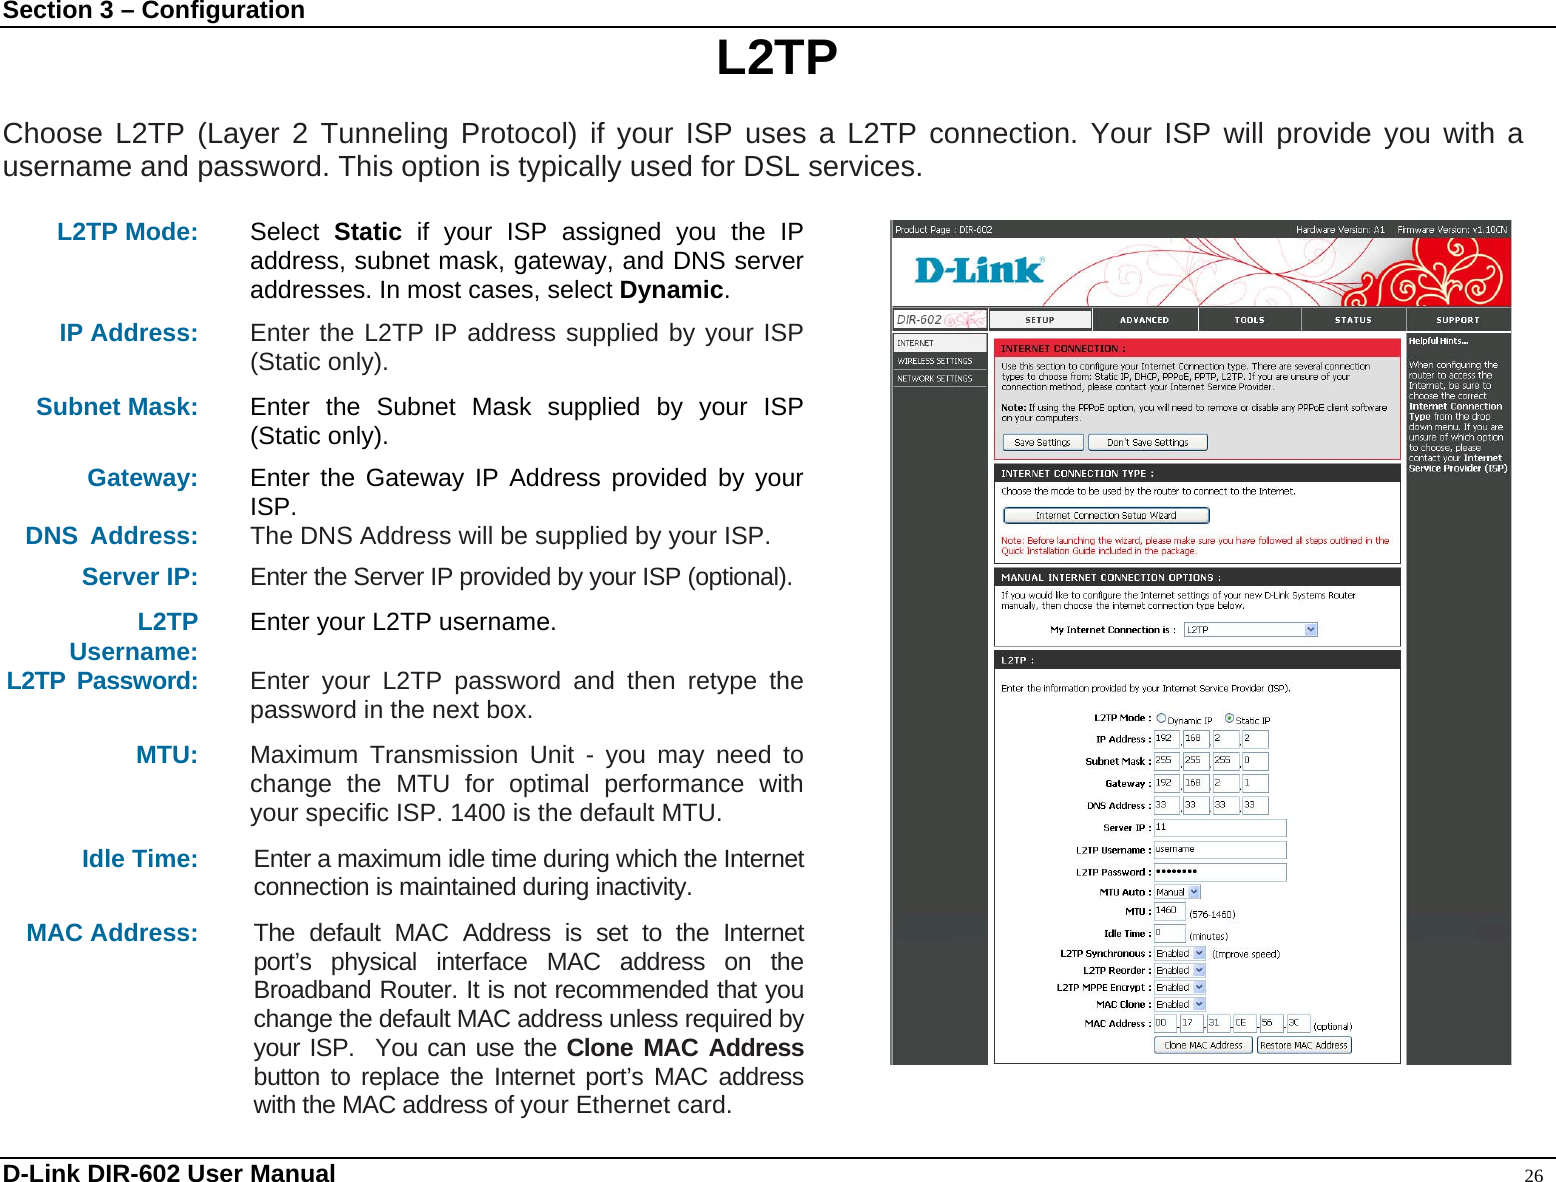 Section 3 – Configuration  L2TP  Choose L2TP (Layer 2 Tunneling Protocol) if your ISP uses a L2TP connection. Your ISP will provide you with a username and password. This option is typically used for DSL services.   L2TP Mode:  Select  Static if your ISP assigned you the IP address, subnet mask, gateway, and DNS server addresses. In most cases, select Dynamic. IP Address: Enter the L2TP IP address supplied by your ISP (Static only).  Subnet Mask: Enter the Subnet Mask supplied by your ISP (Static only). Gateway: Enter the Gateway IP Address provided by your ISP. DNS Address:  The DNS Address will be supplied by your ISP.  Server IP: Enter the Server IP provided by your ISP (optional). L2TP Username: Enter your L2TP username. L2TP Password:  Enter your L2TP password and then retype the password in the next box. MTU: Maximum Transmission Unit - you may need to change the MTU for optimal performance with your specific ISP. 1400 is the default MTU. Idle Time:  Enter a maximum idle time during which the Internet connection is maintained during inactivity. MAC Address:  The default MAC Address is set to the Internet port’s physical interface MAC address on the Broadband Router. It is not recommended that you change the default MAC address unless required by your ISP.  You can use the Clone MAC Address button to replace the Internet port’s MAC address with the MAC address of your Ethernet card.  D-Link DIR-602 User Manual                                                                                               26 